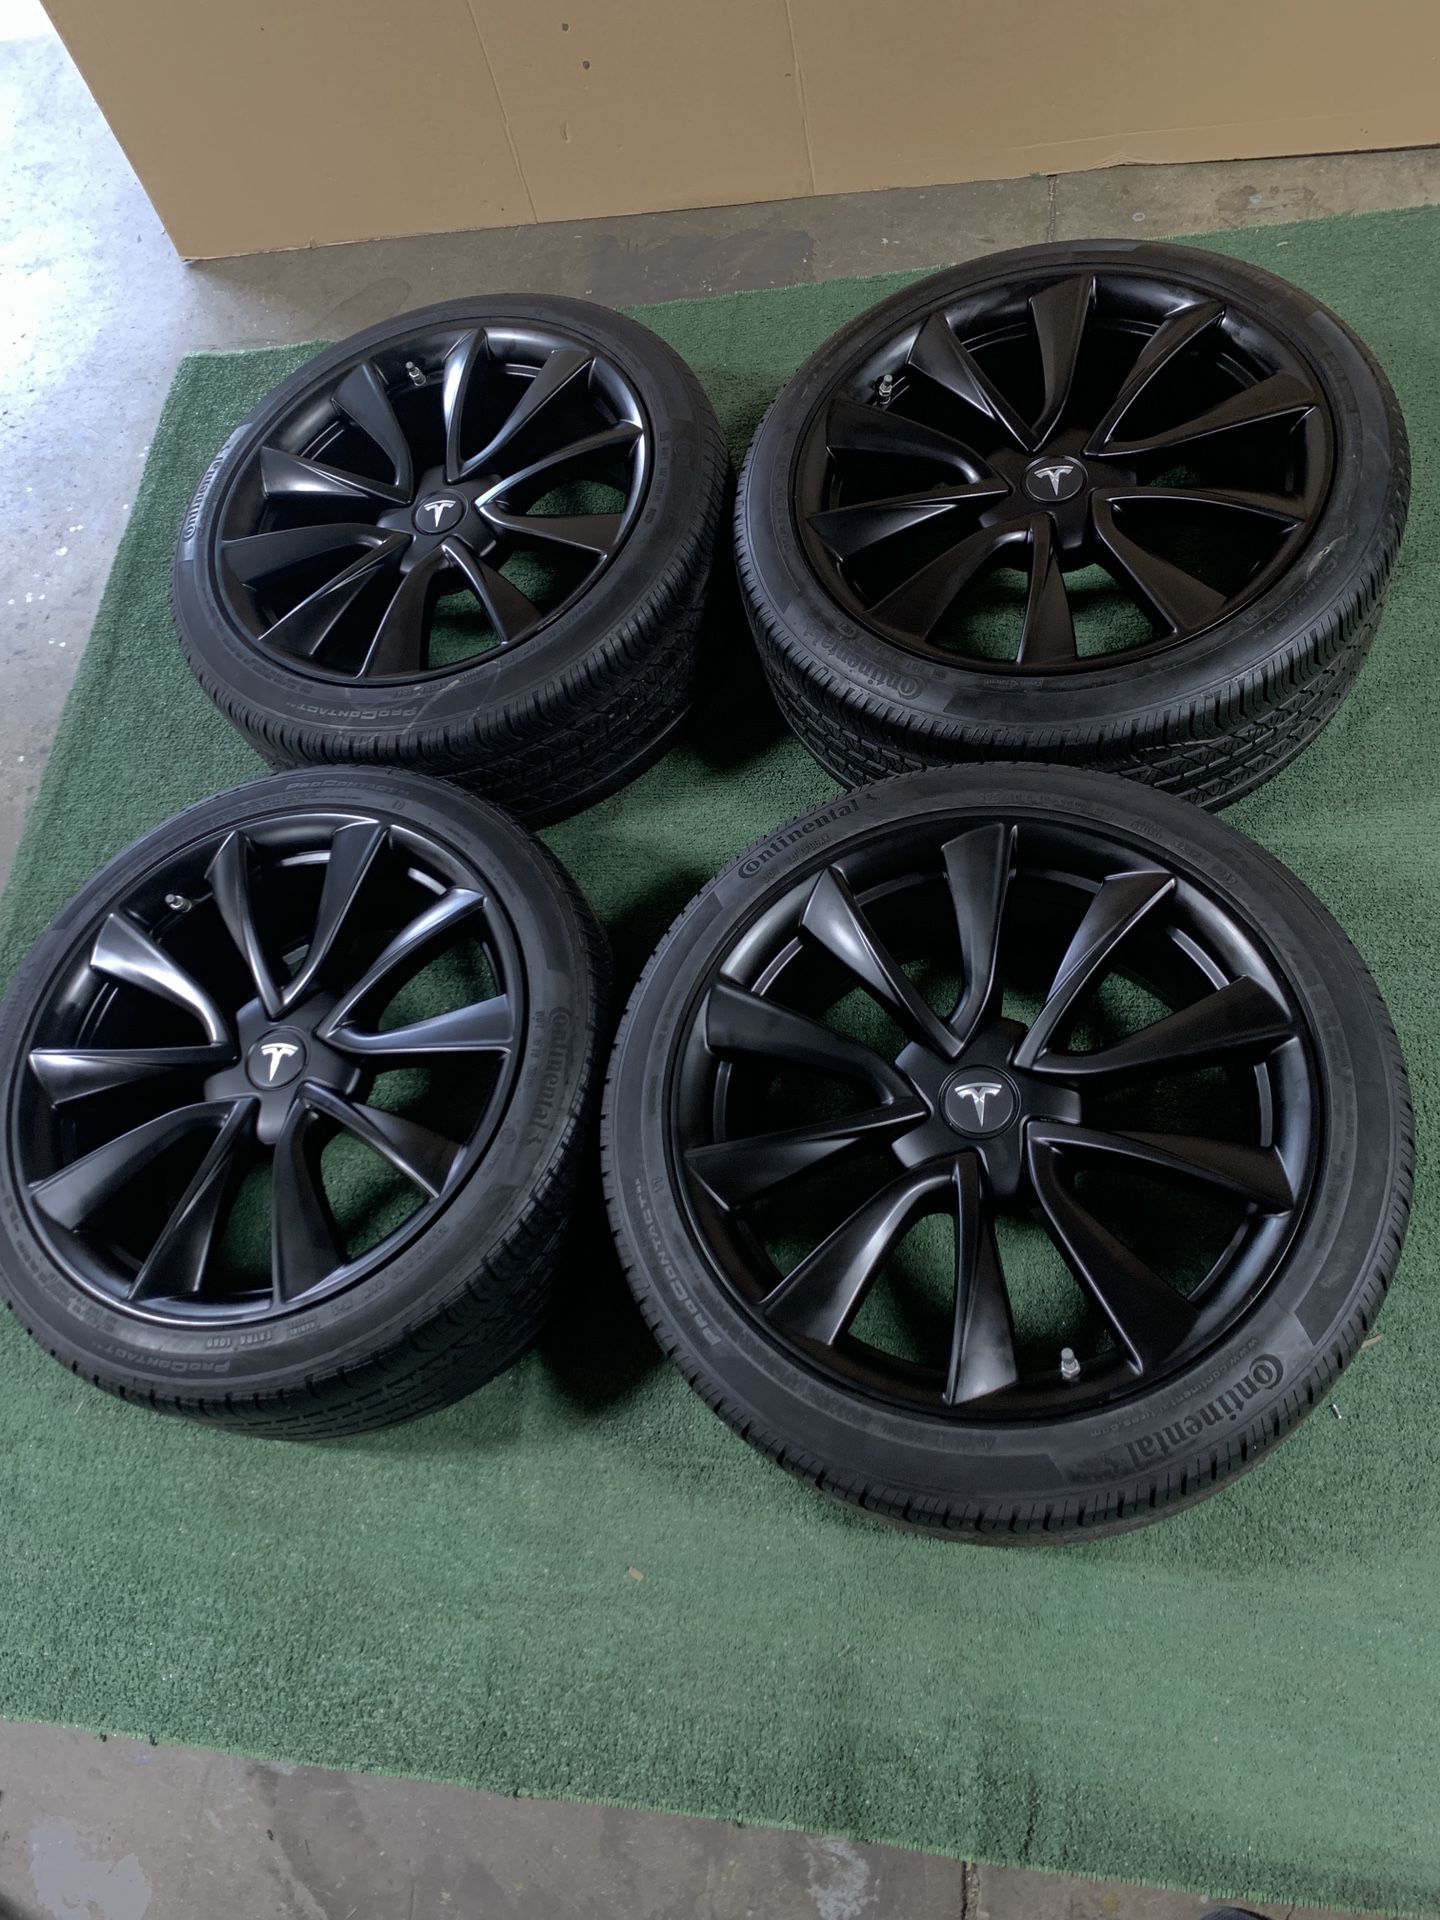 Tesla Model 3 Matte Black 19in Rims Comes With Tires Good Thread  